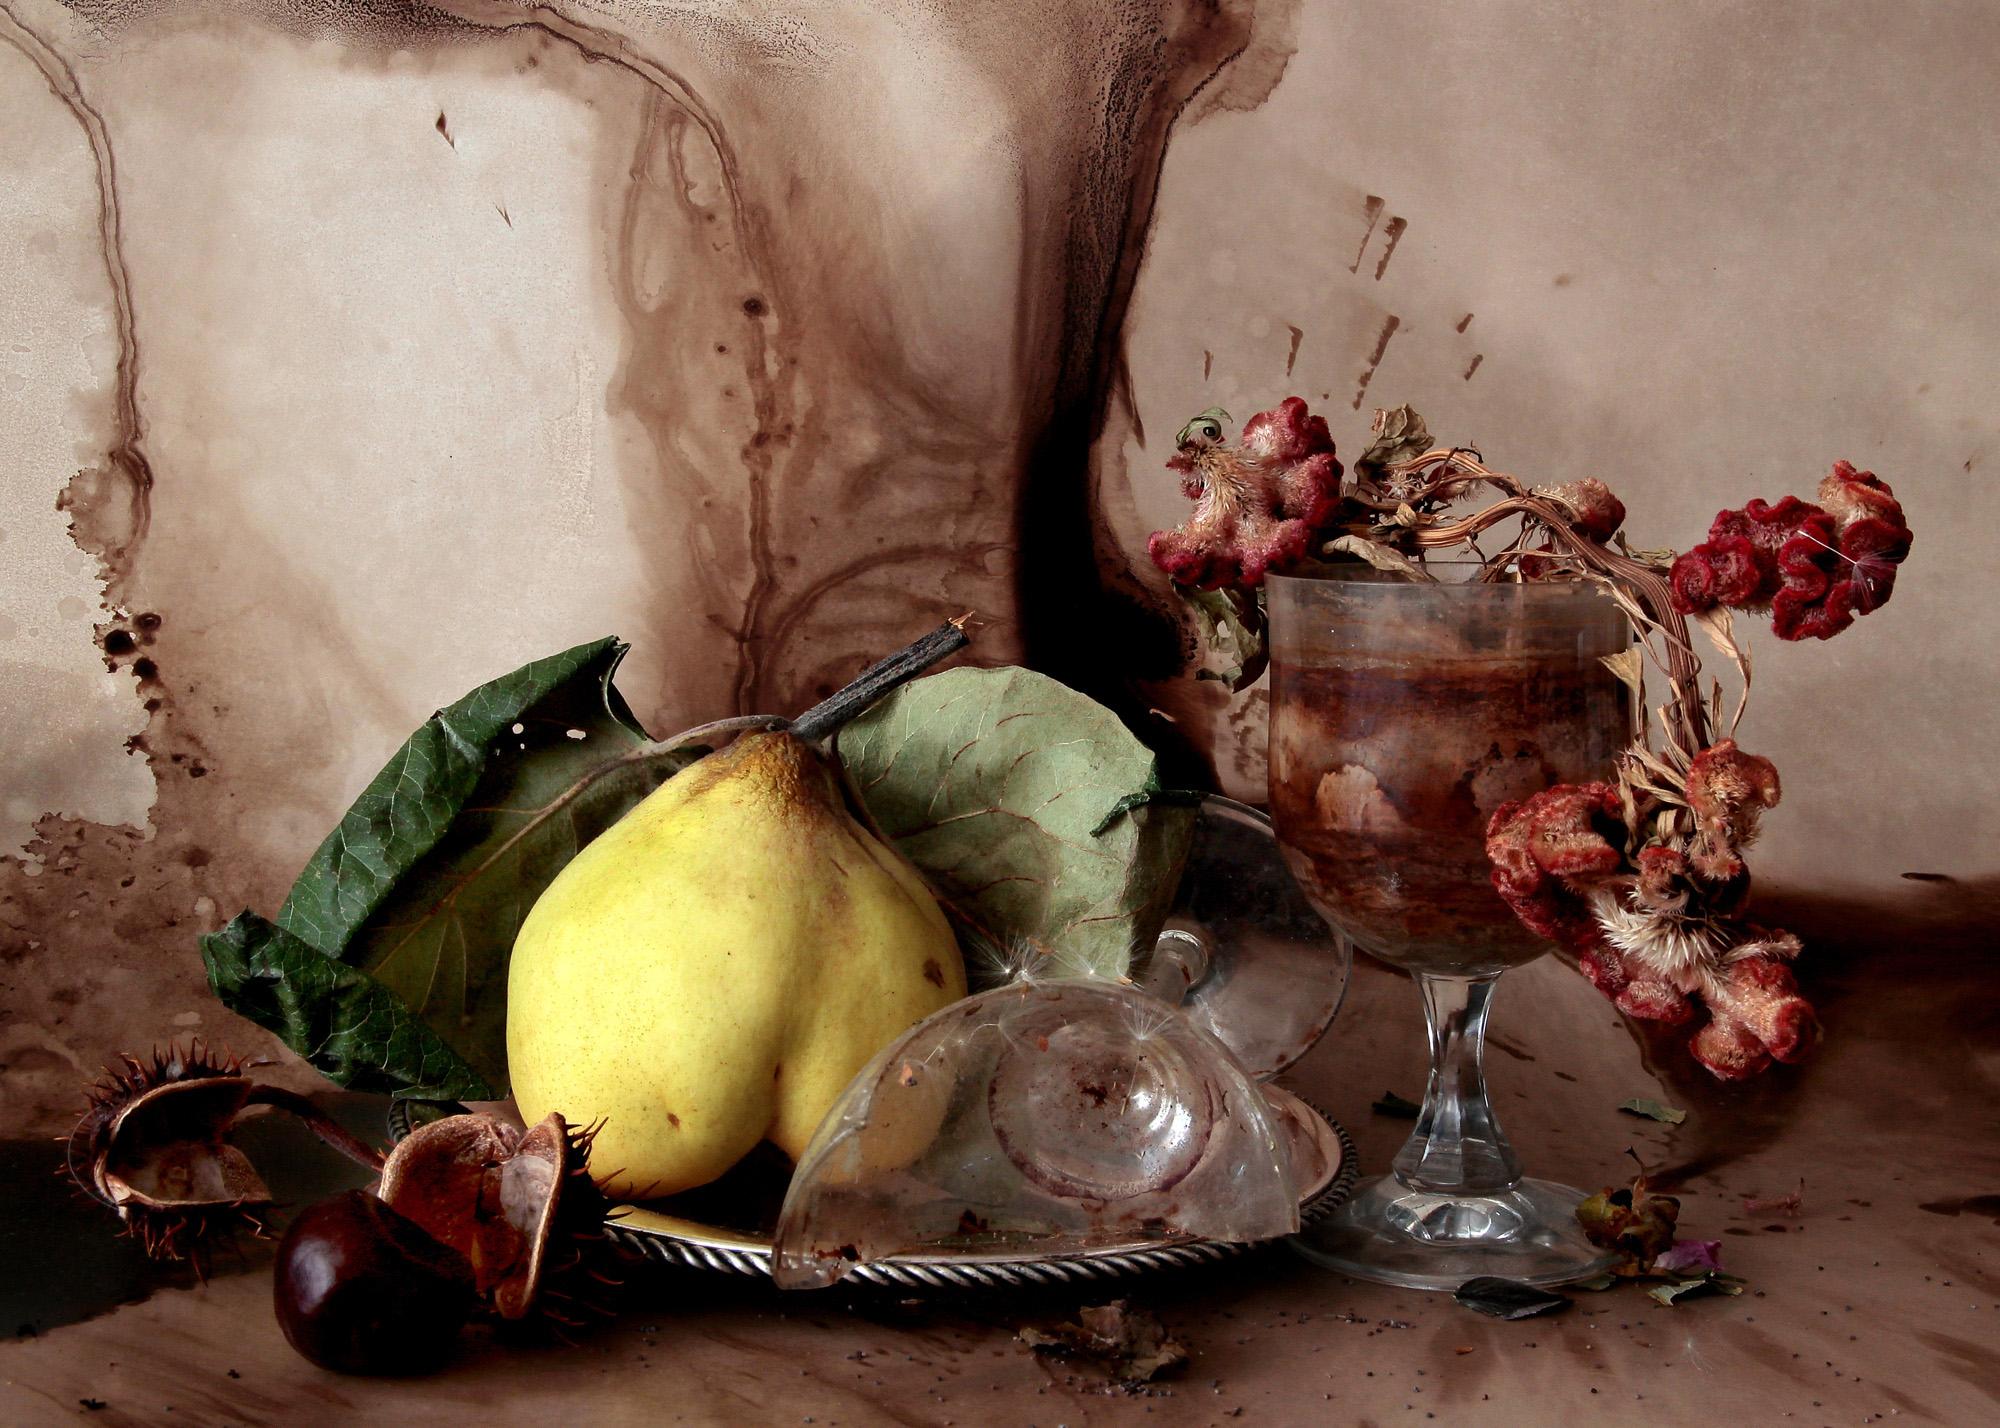 From the series "Natura Morte" still life
The photographic image of the withered flowers, rotten fruit, animal bones and broken glasses seems to preserve the objects, keep them alive and thus point them beyond death.